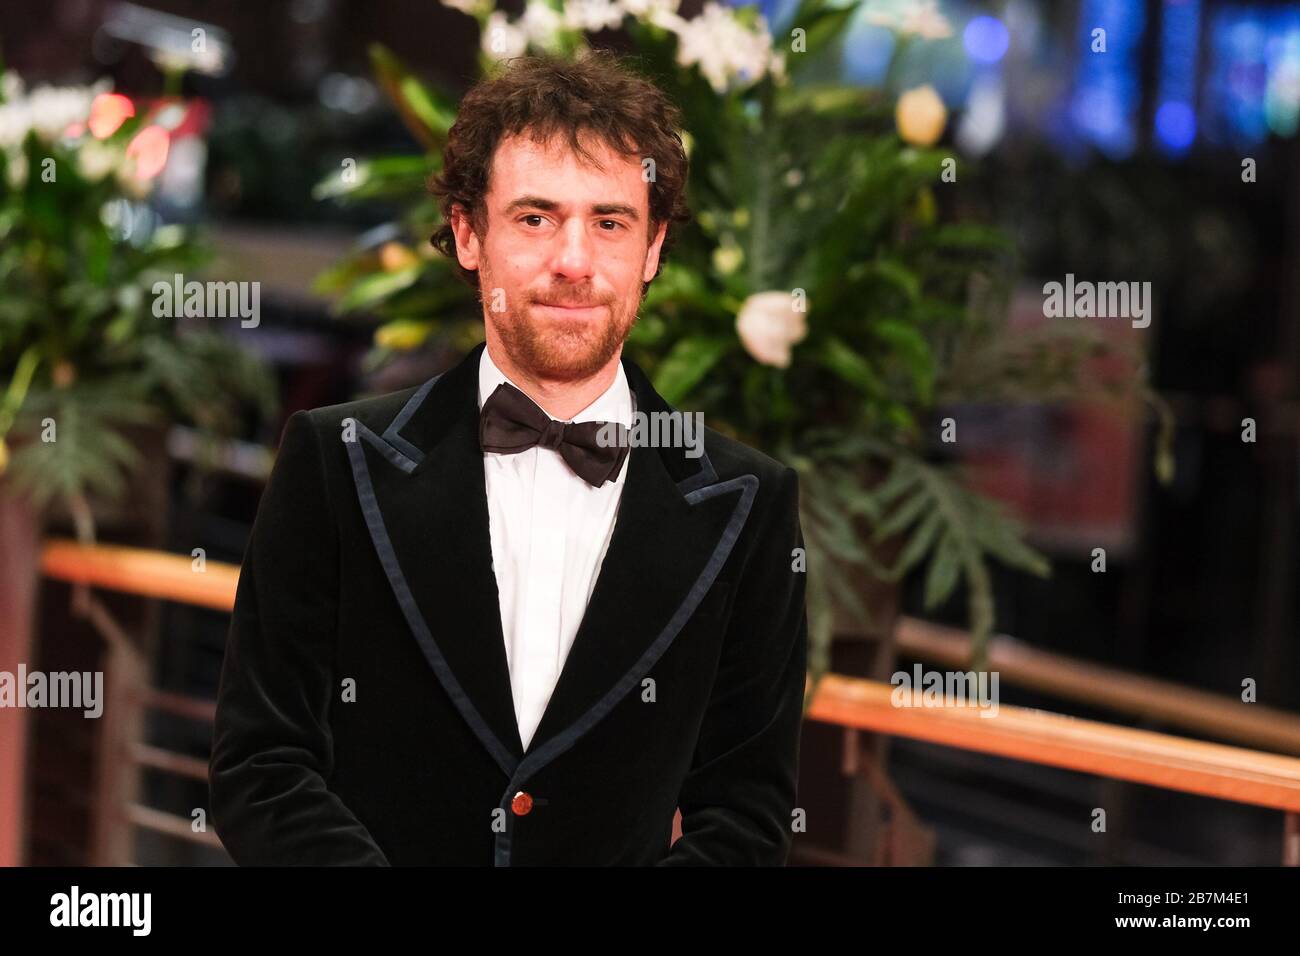 Elio Germano  poses on the red carpet at Closing Ceremony and Awards during the 70th Berlin International Film Festival ( Berlinale ) on Saturday 29 February 2020 at Berlinale Palast, Potsdamer Platz, Berlin. . Picture by Julie Edwards. Stock Photo